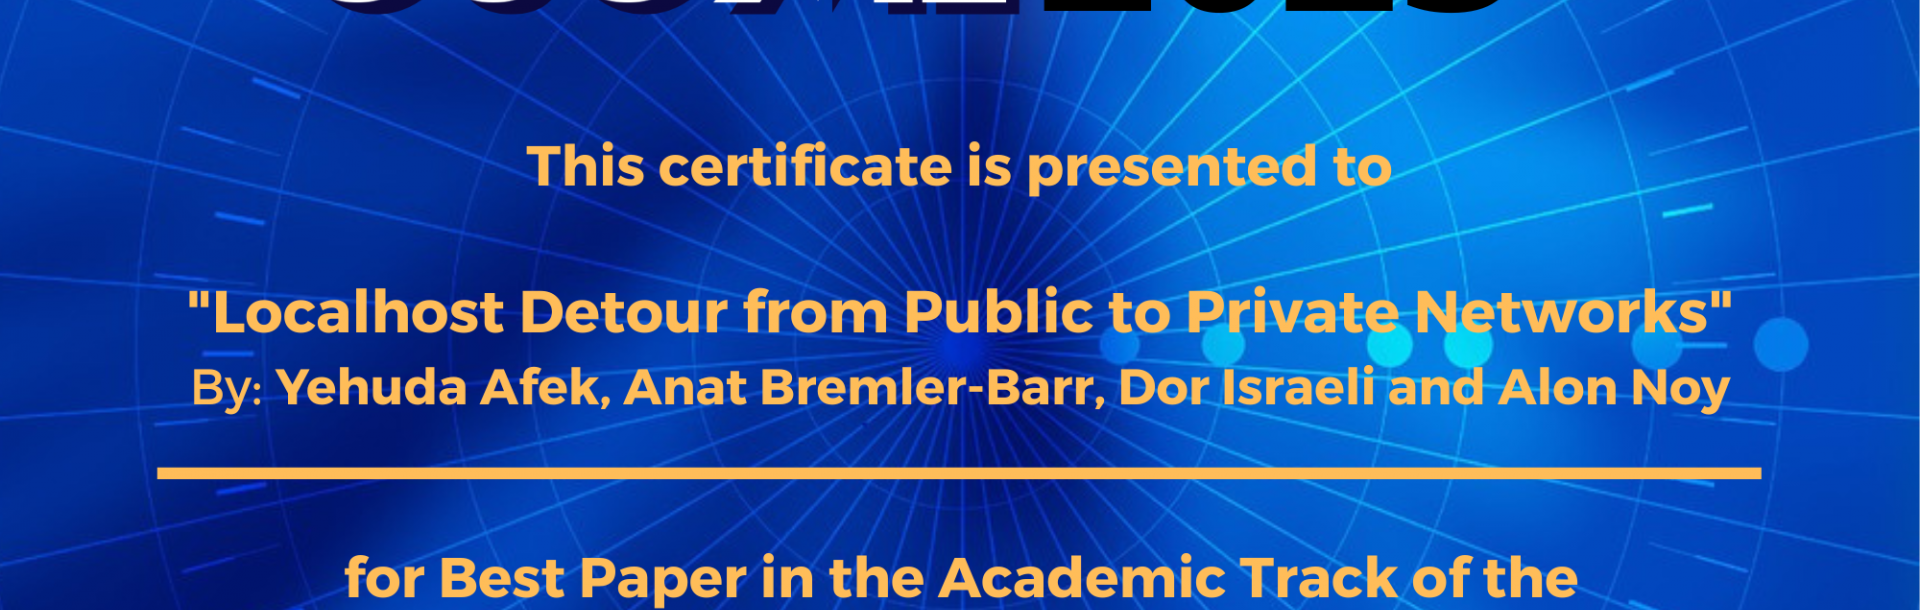 Congratulations to:
Yehuda Afek, Bremler Bremler-Barr, Dor Israeli and Alon Noy for winning the Best Paper Award for their paper, &quot;Localhost Detour from Public to Private Networks.&quot;